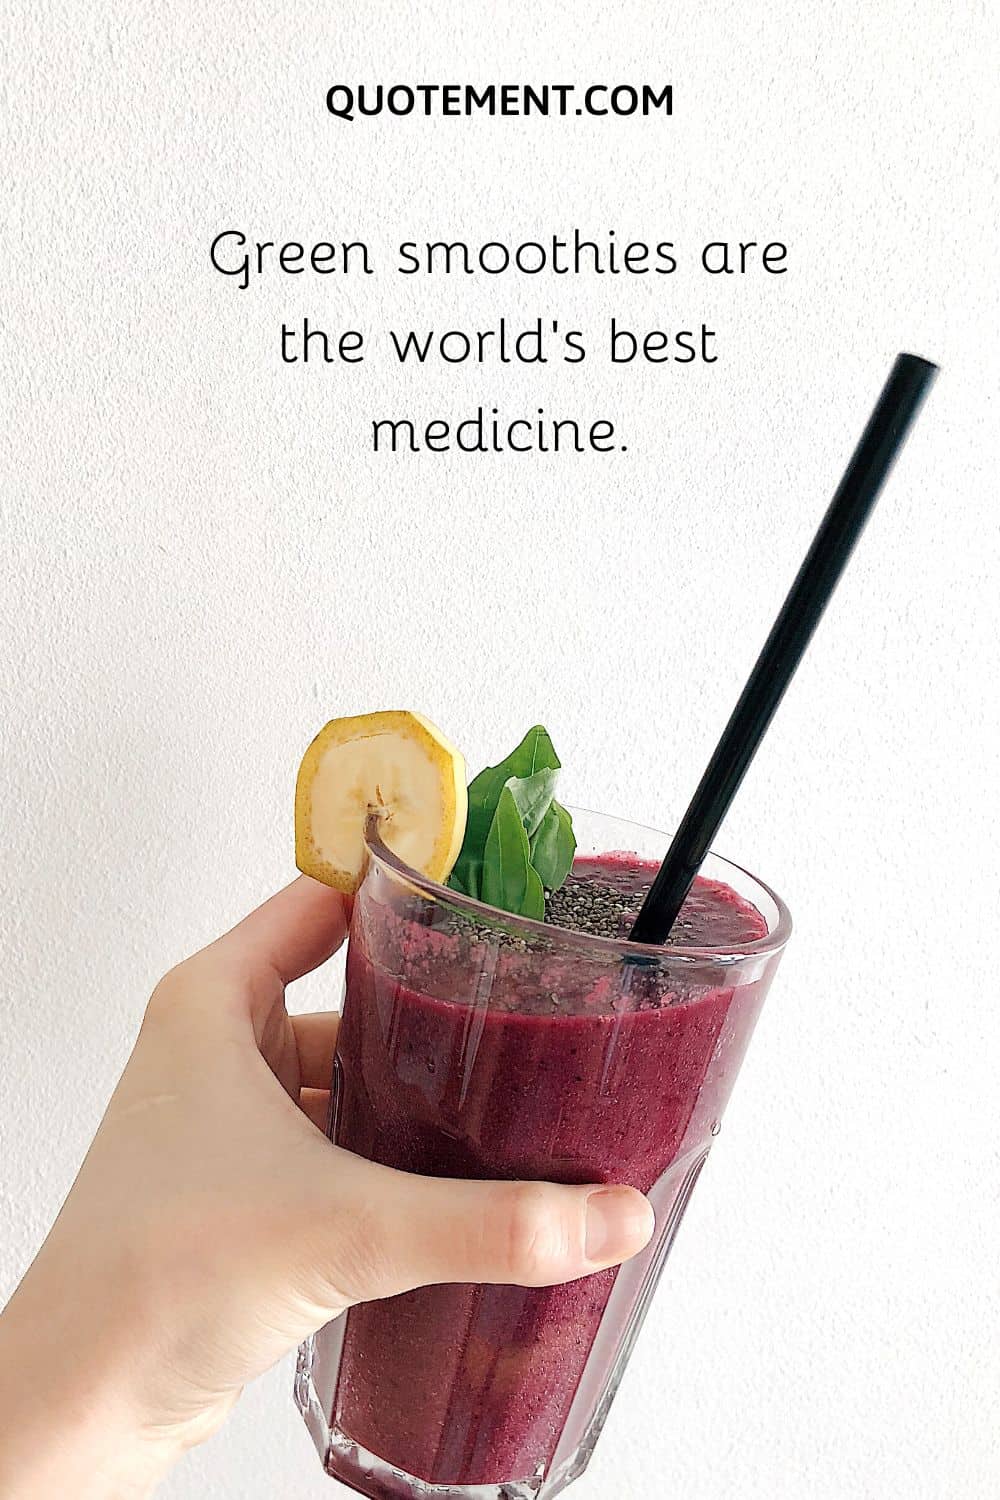 Green smoothies are the world’s best medicine.